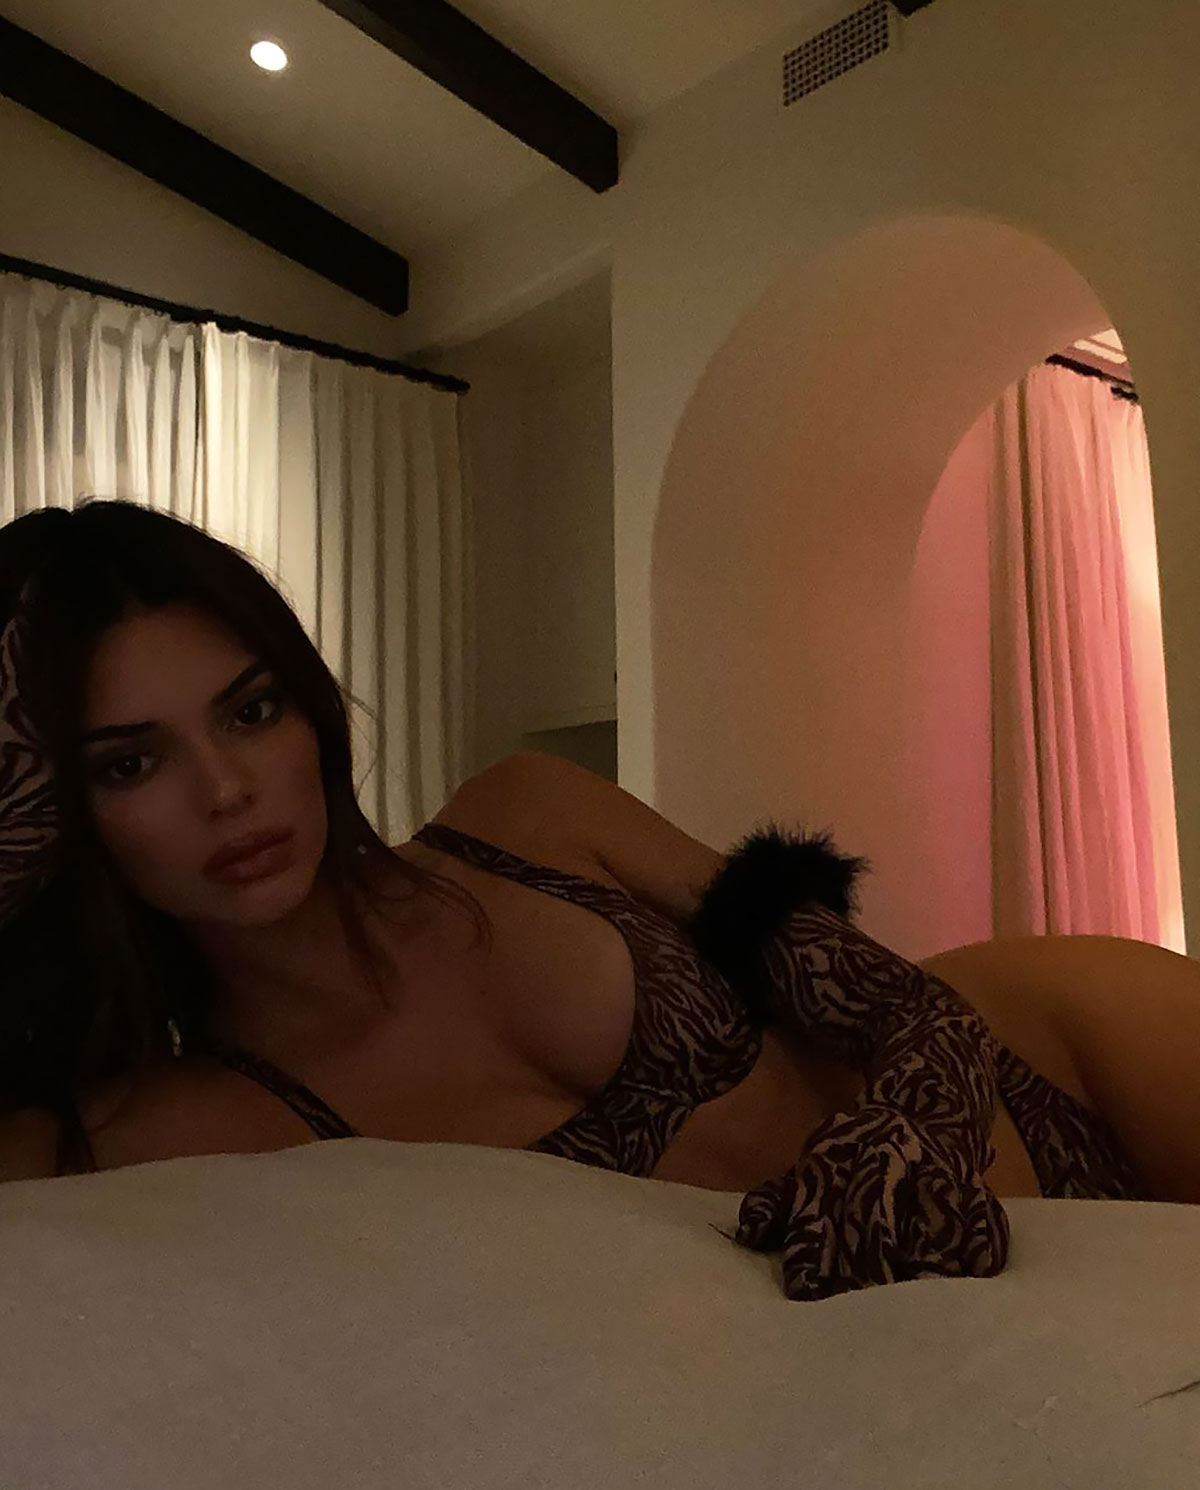 Kendall jenner compilation hottest long will fan pic